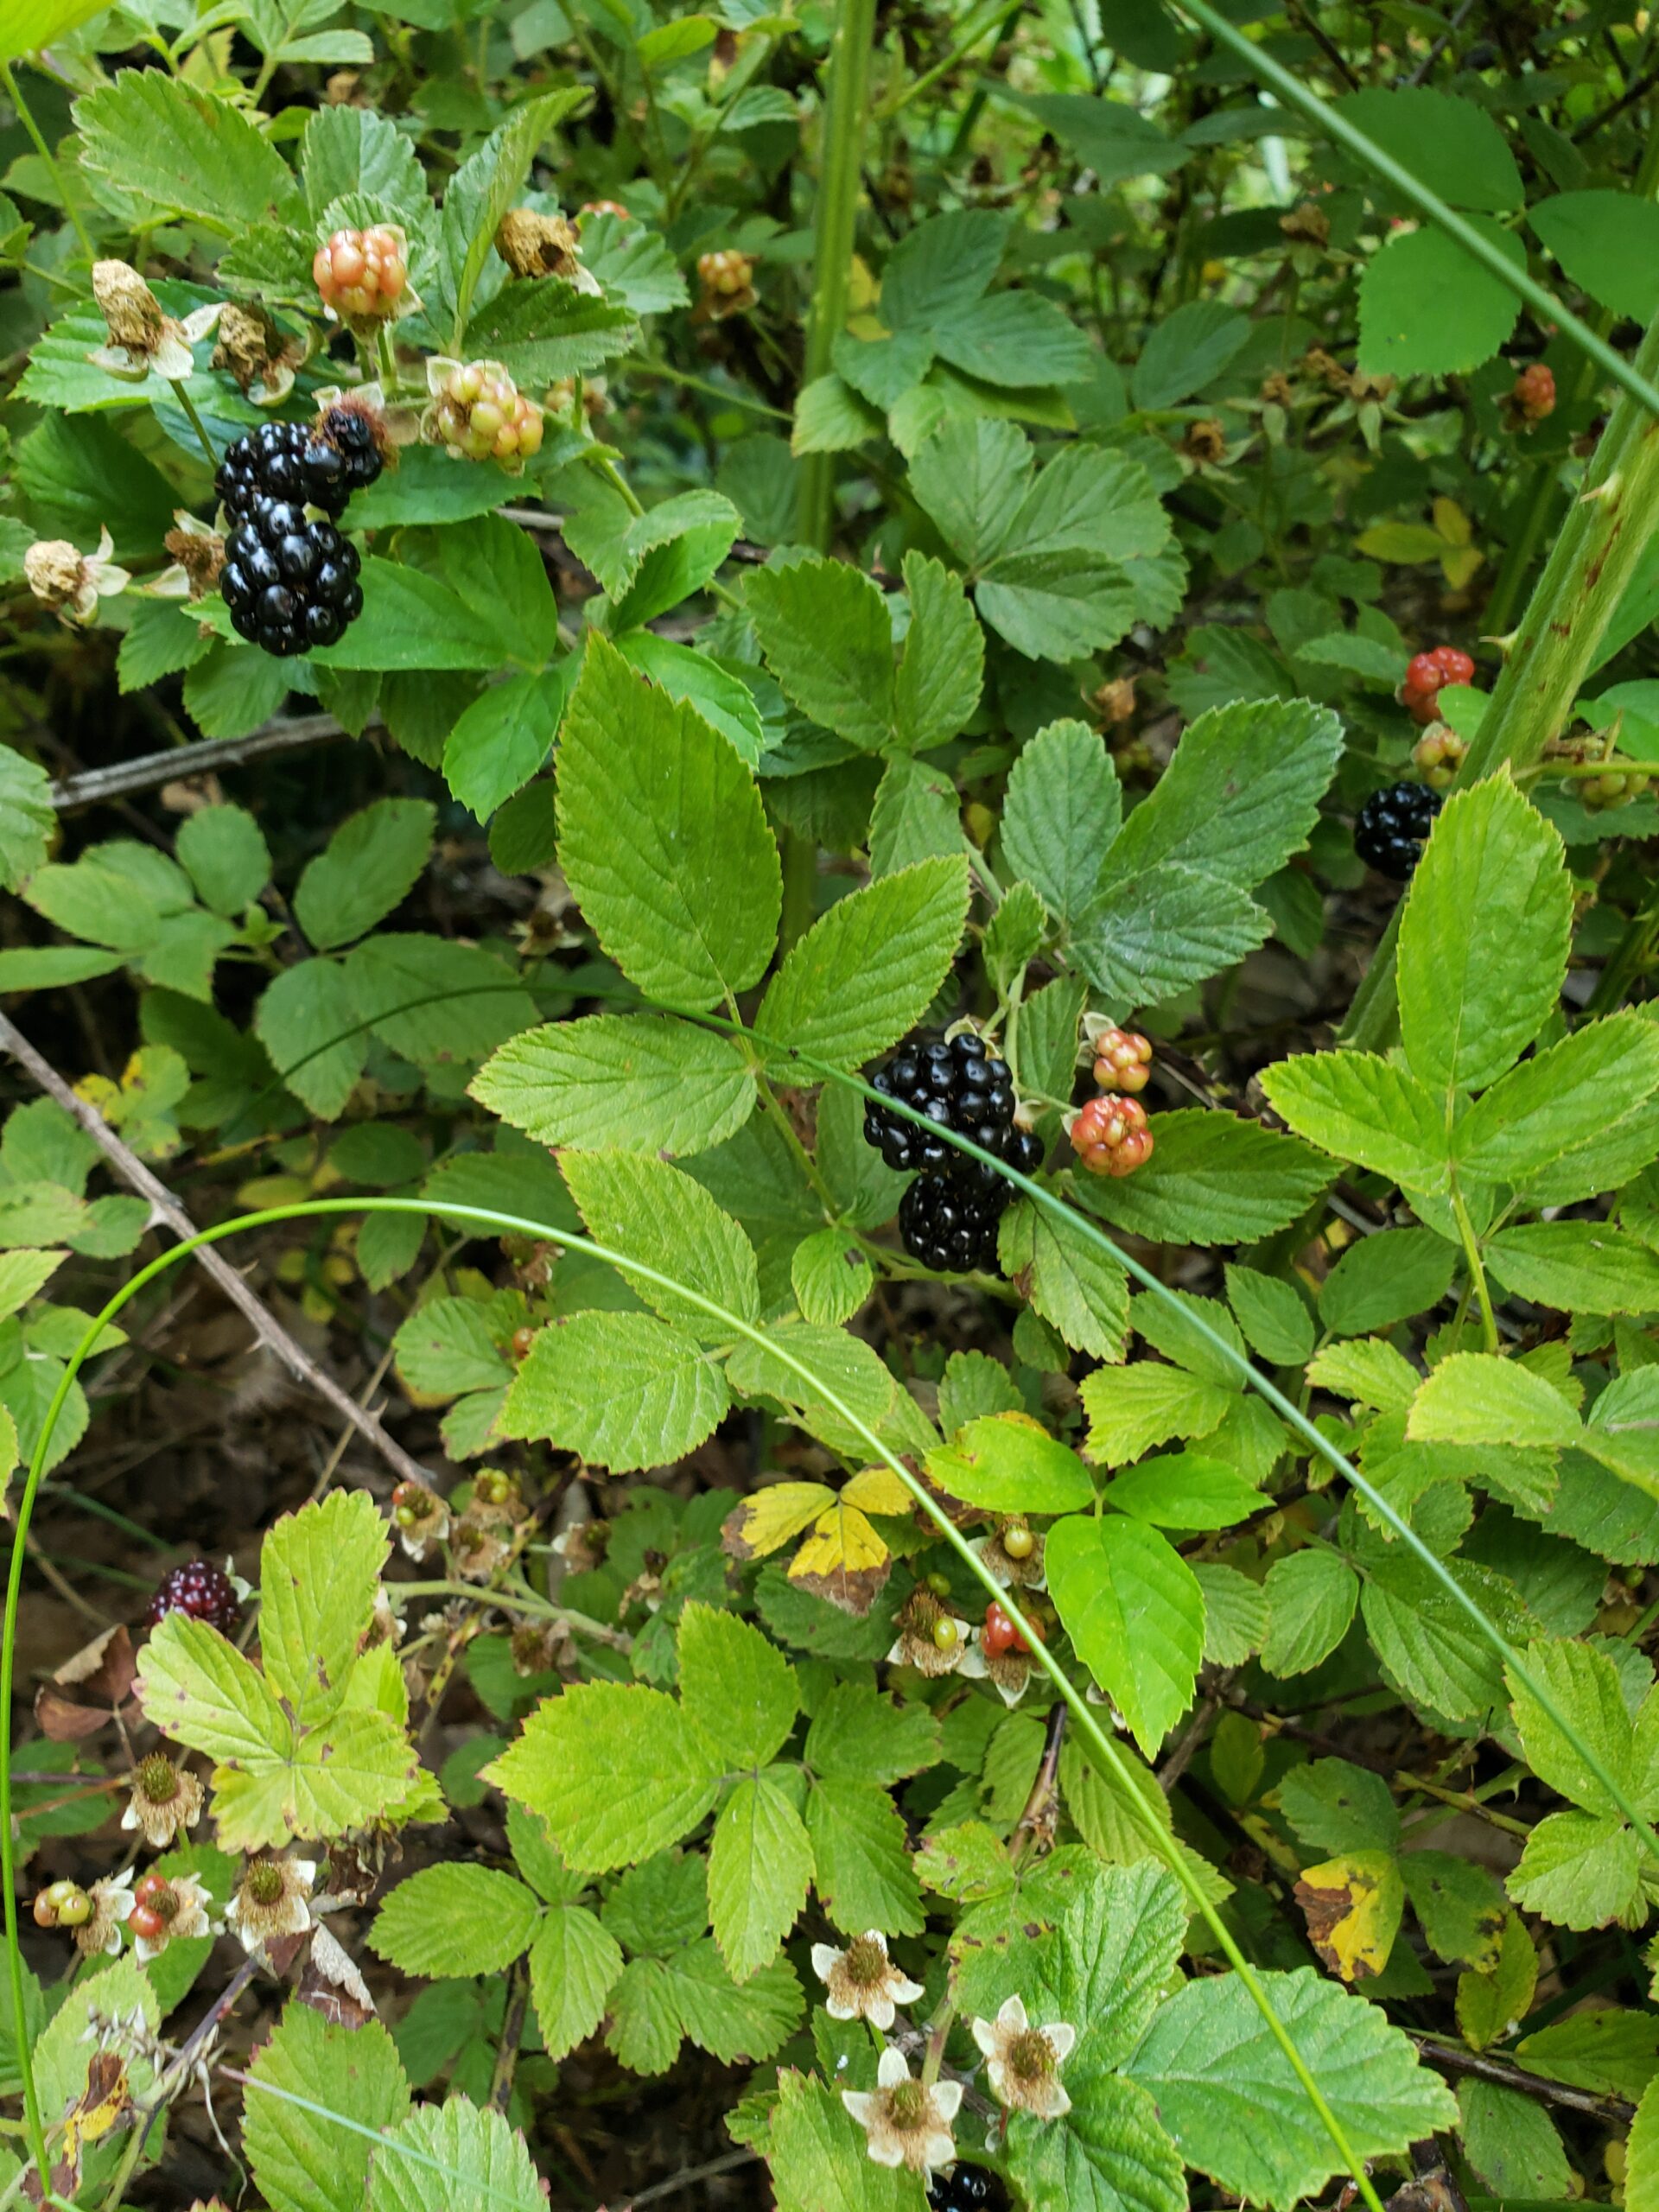 Are Blackberry Leaves Edible? Exploring the Benefits and Risks